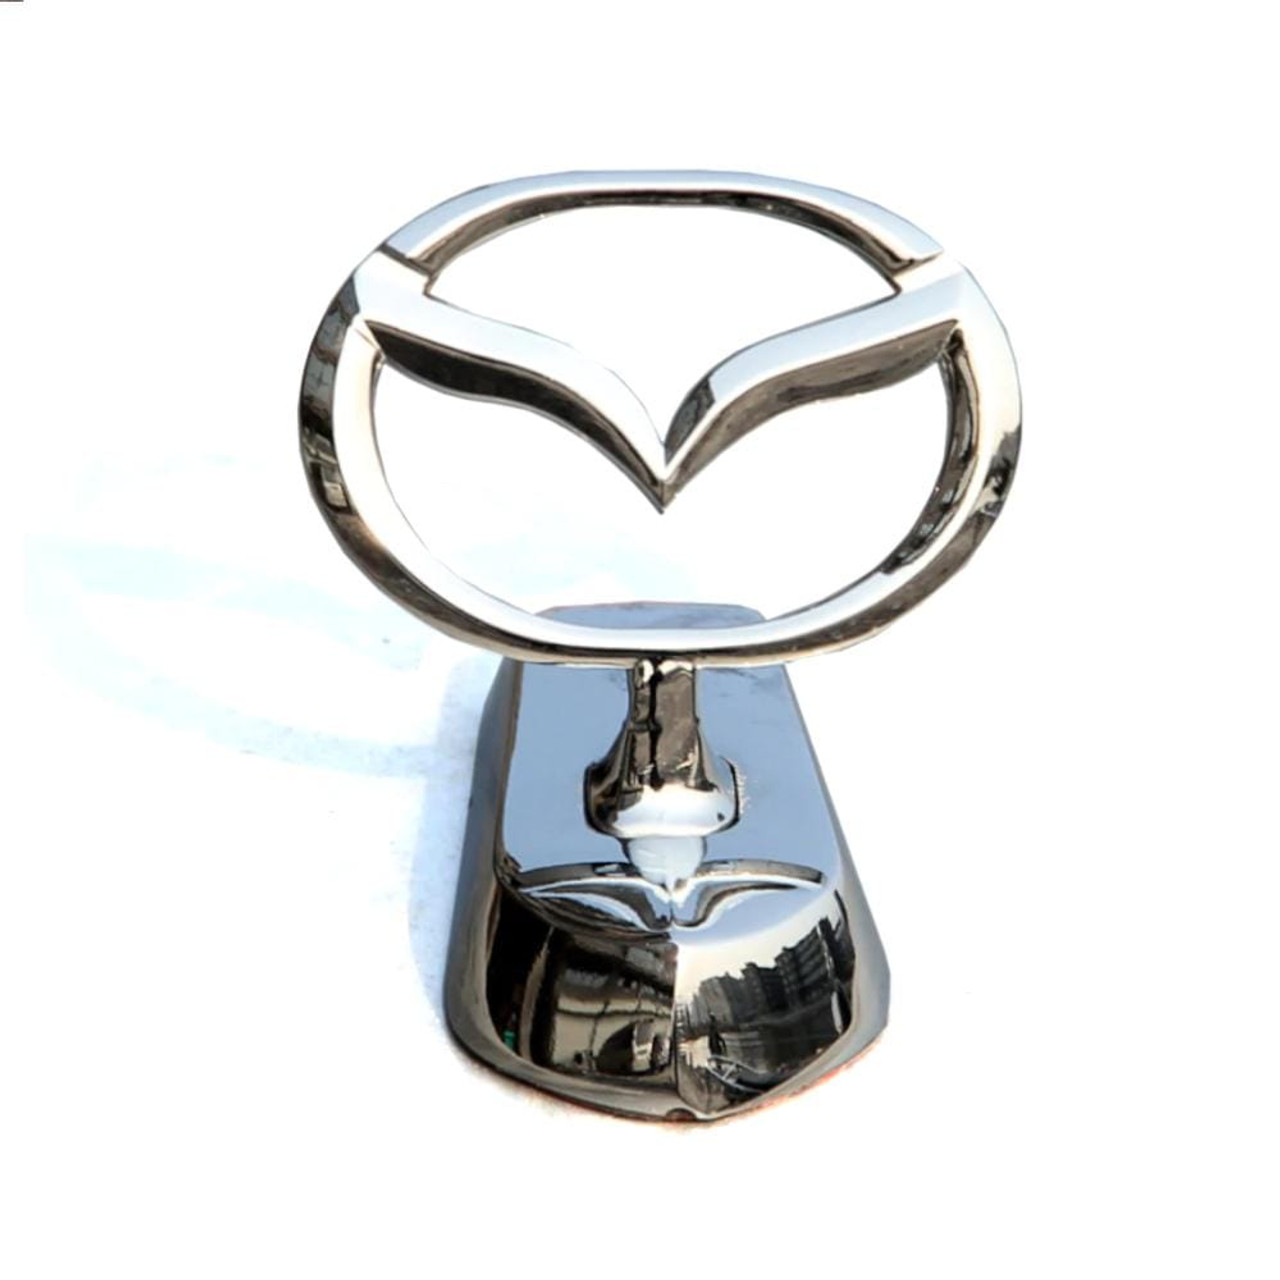 Car Mazda Logo Front Hood Stand Emblem Sticker Decal Adhesive Auto